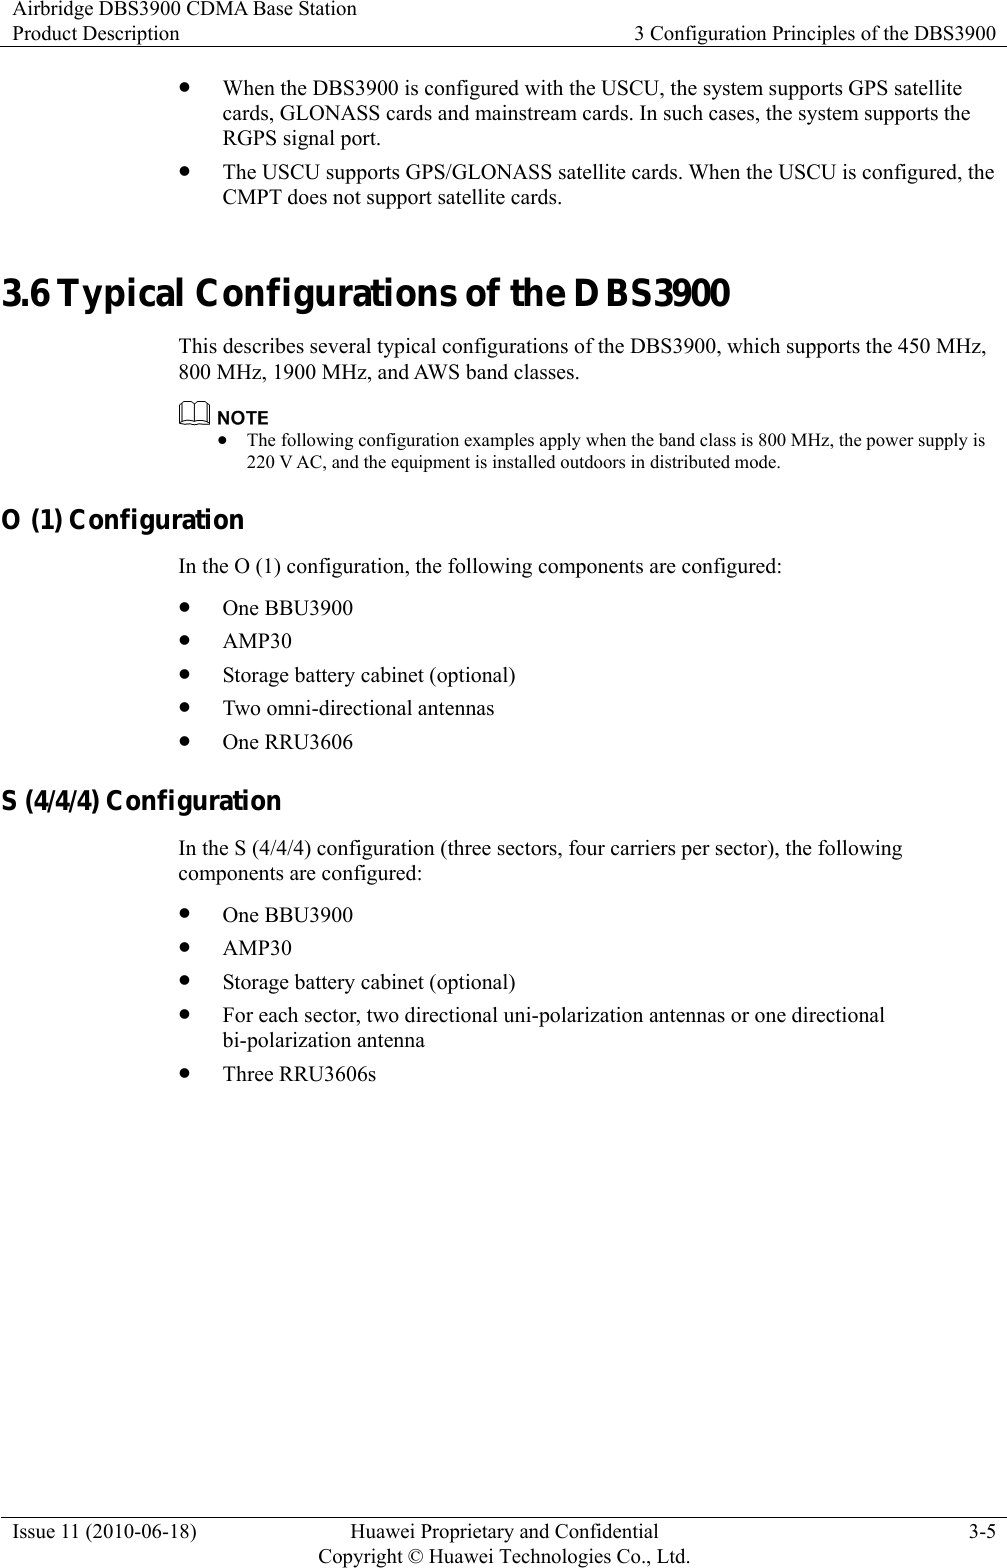 Airbridge DBS3900 CDMA Base Station Product Description  3 Configuration Principles of the DBS3900 Issue 11 (2010-06-18)  Huawei Proprietary and Confidential         Copyright © Huawei Technologies Co., Ltd.3-5 z When the DBS3900 is configured with the USCU, the system supports GPS satellite cards, GLONASS cards and mainstream cards. In such cases, the system supports the RGPS signal port. z The USCU supports GPS/GLONASS satellite cards. When the USCU is configured, the CMPT does not support satellite cards. 3.6 Typical Configurations of the DBS3900 This describes several typical configurations of the DBS3900, which supports the 450 MHz, 800 MHz, 1900 MHz, and AWS band classes.  z The following configuration examples apply when the band class is 800 MHz, the power supply is 220 V AC, and the equipment is installed outdoors in distributed mode. O (1) Configuration In the O (1) configuration, the following components are configured: z One BBU3900 z AMP30 z Storage battery cabinet (optional) z Two omni-directional antennas z One RRU3606 S (4/4/4) Configuration In the S (4/4/4) configuration (three sectors, four carriers per sector), the following components are configured: z One BBU3900 z AMP30 z Storage battery cabinet (optional) z For each sector, two directional uni-polarization antennas or one directional bi-polarization antenna   z Three RRU3606s 